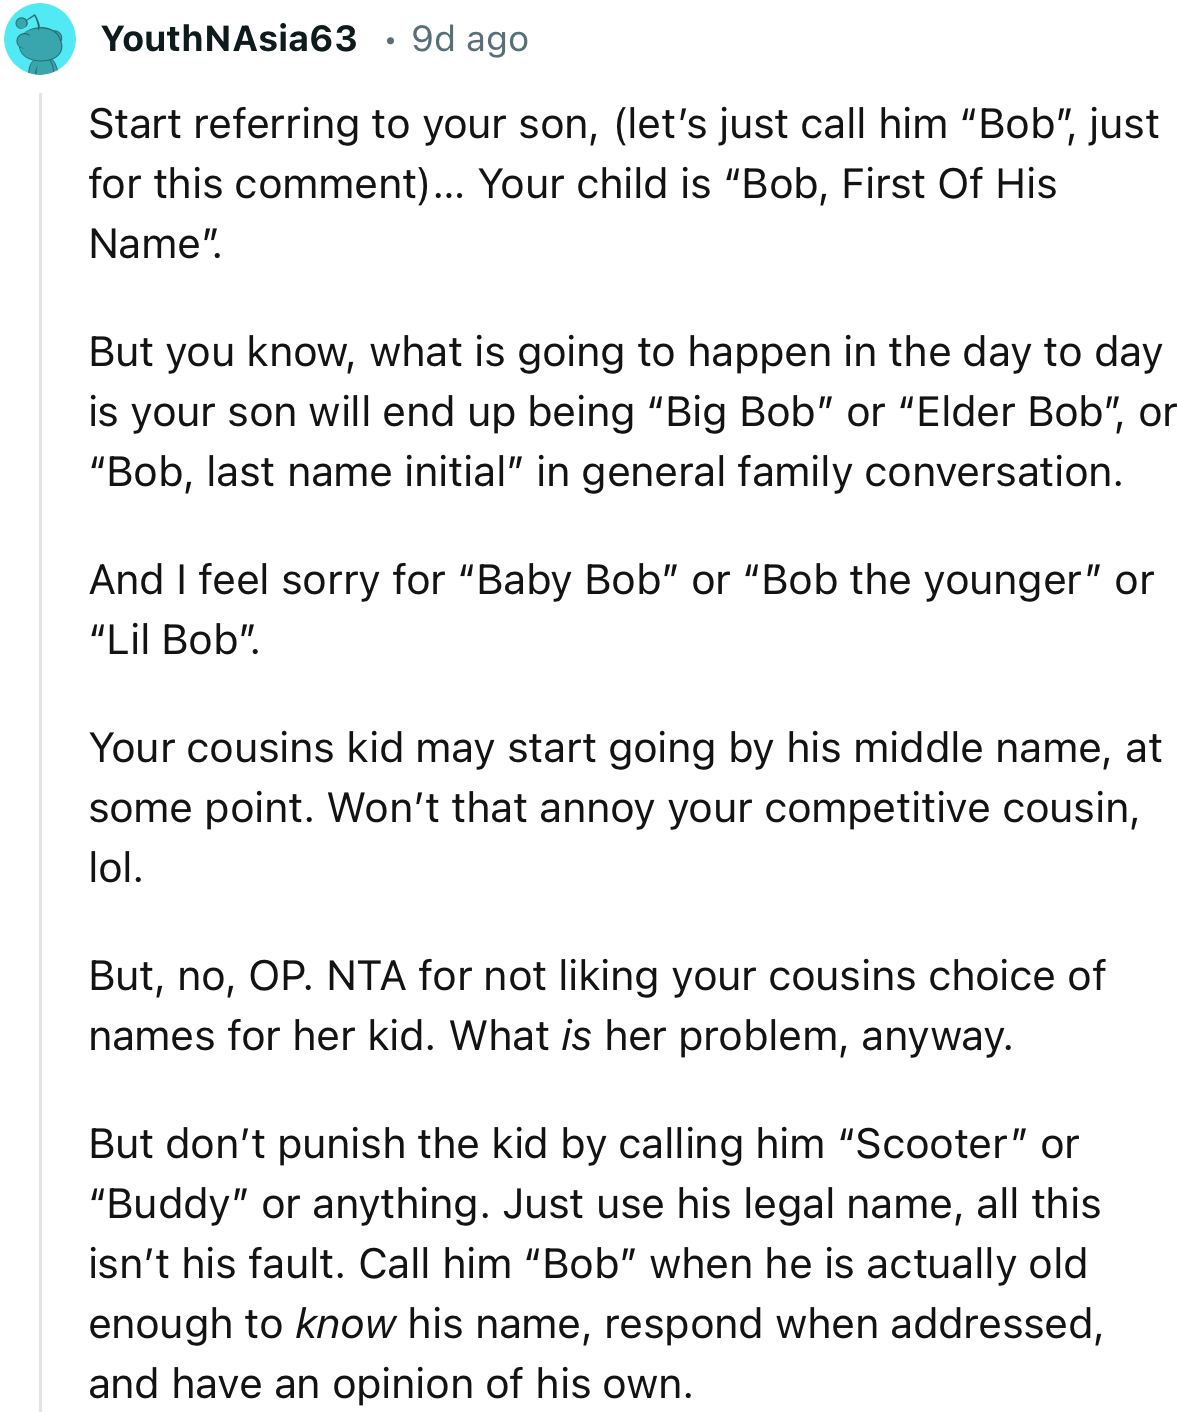 “NTA for not liking your cousins choice of names for her kid. But don’t punish the kid.”